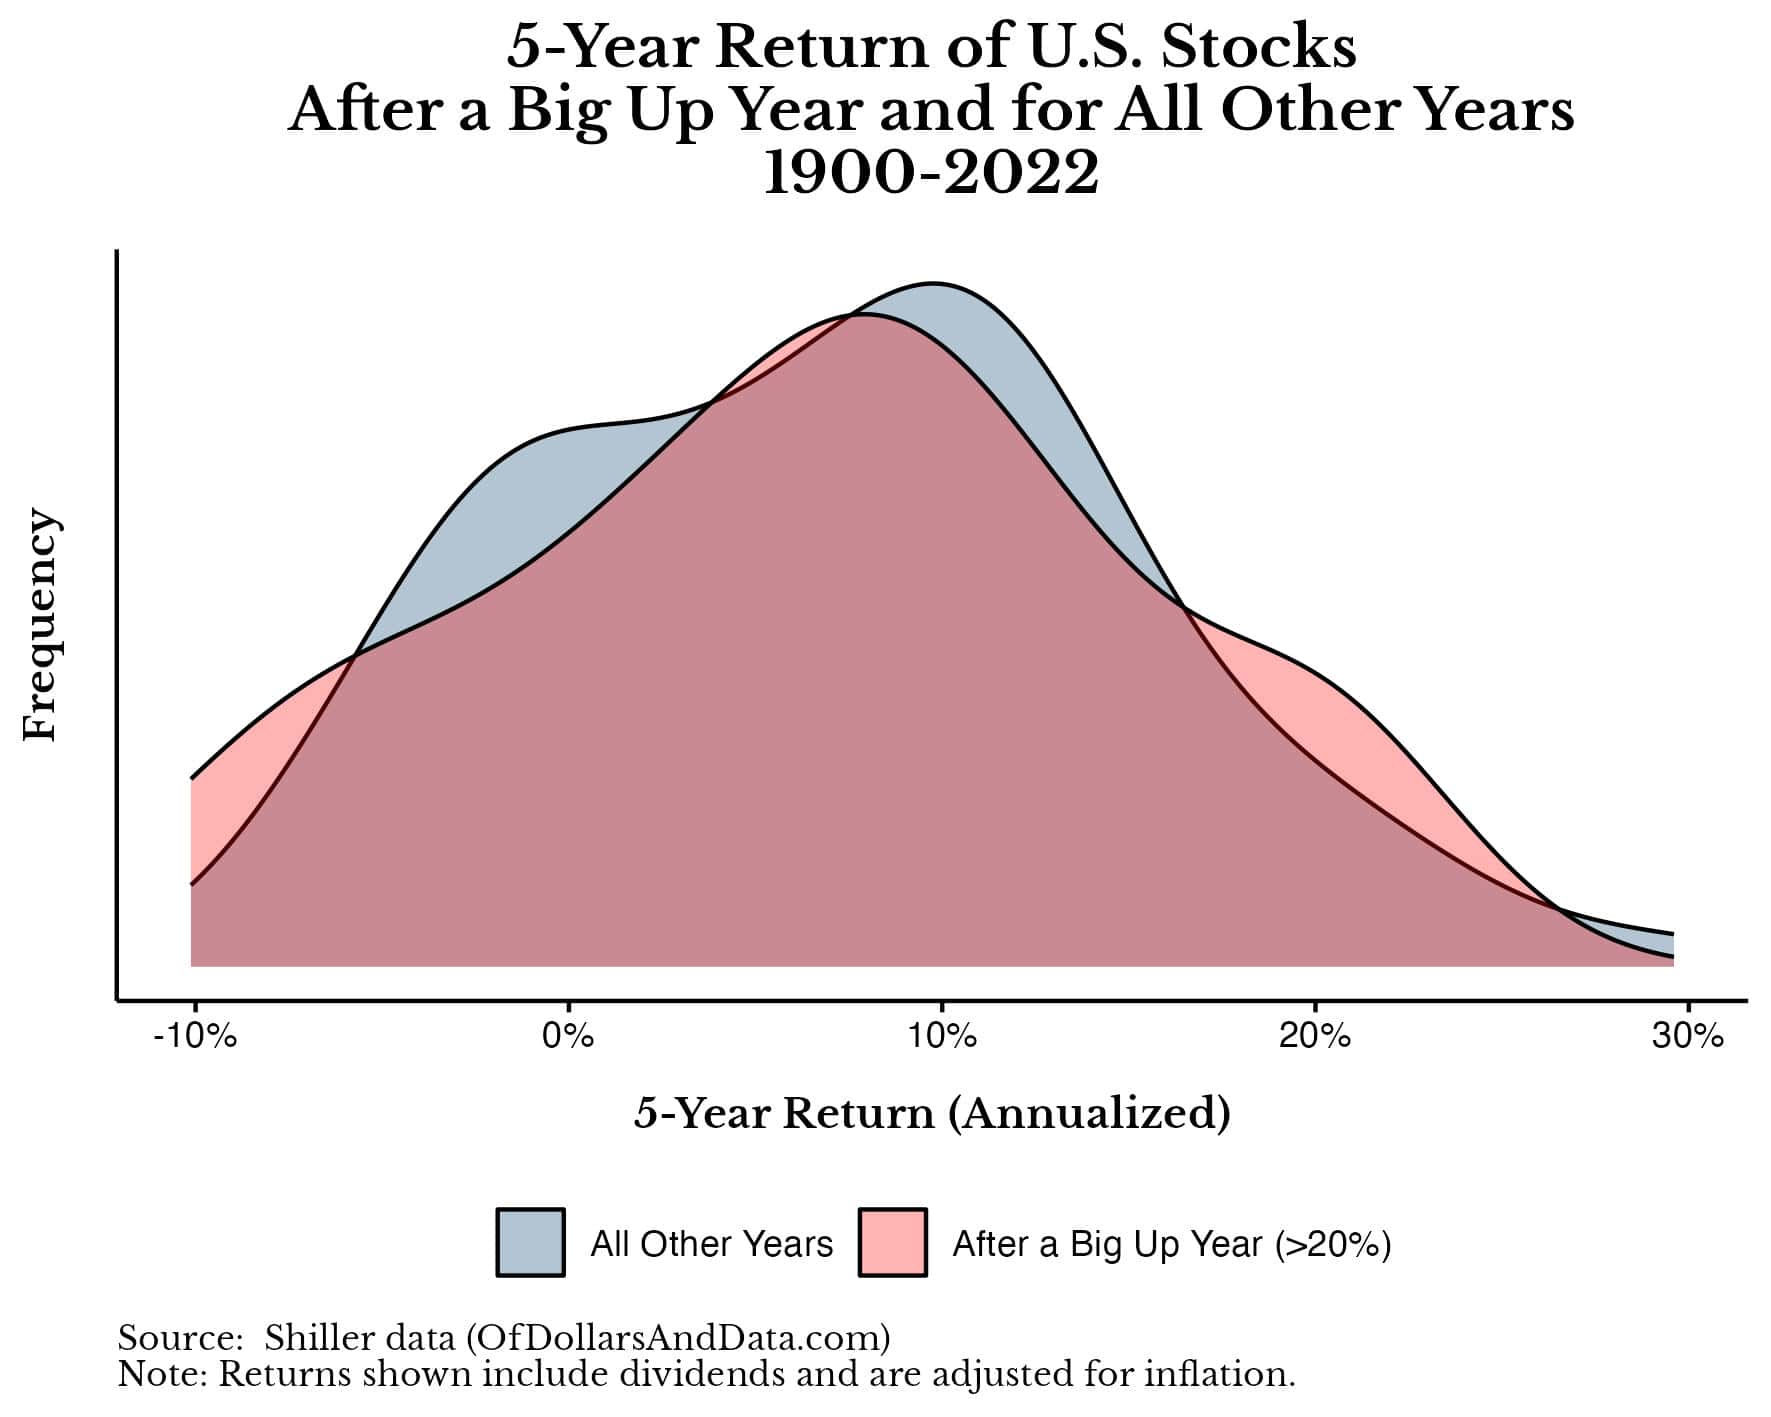 US stock future 5-year returns after a big up year and in all other years from 1900-2022.